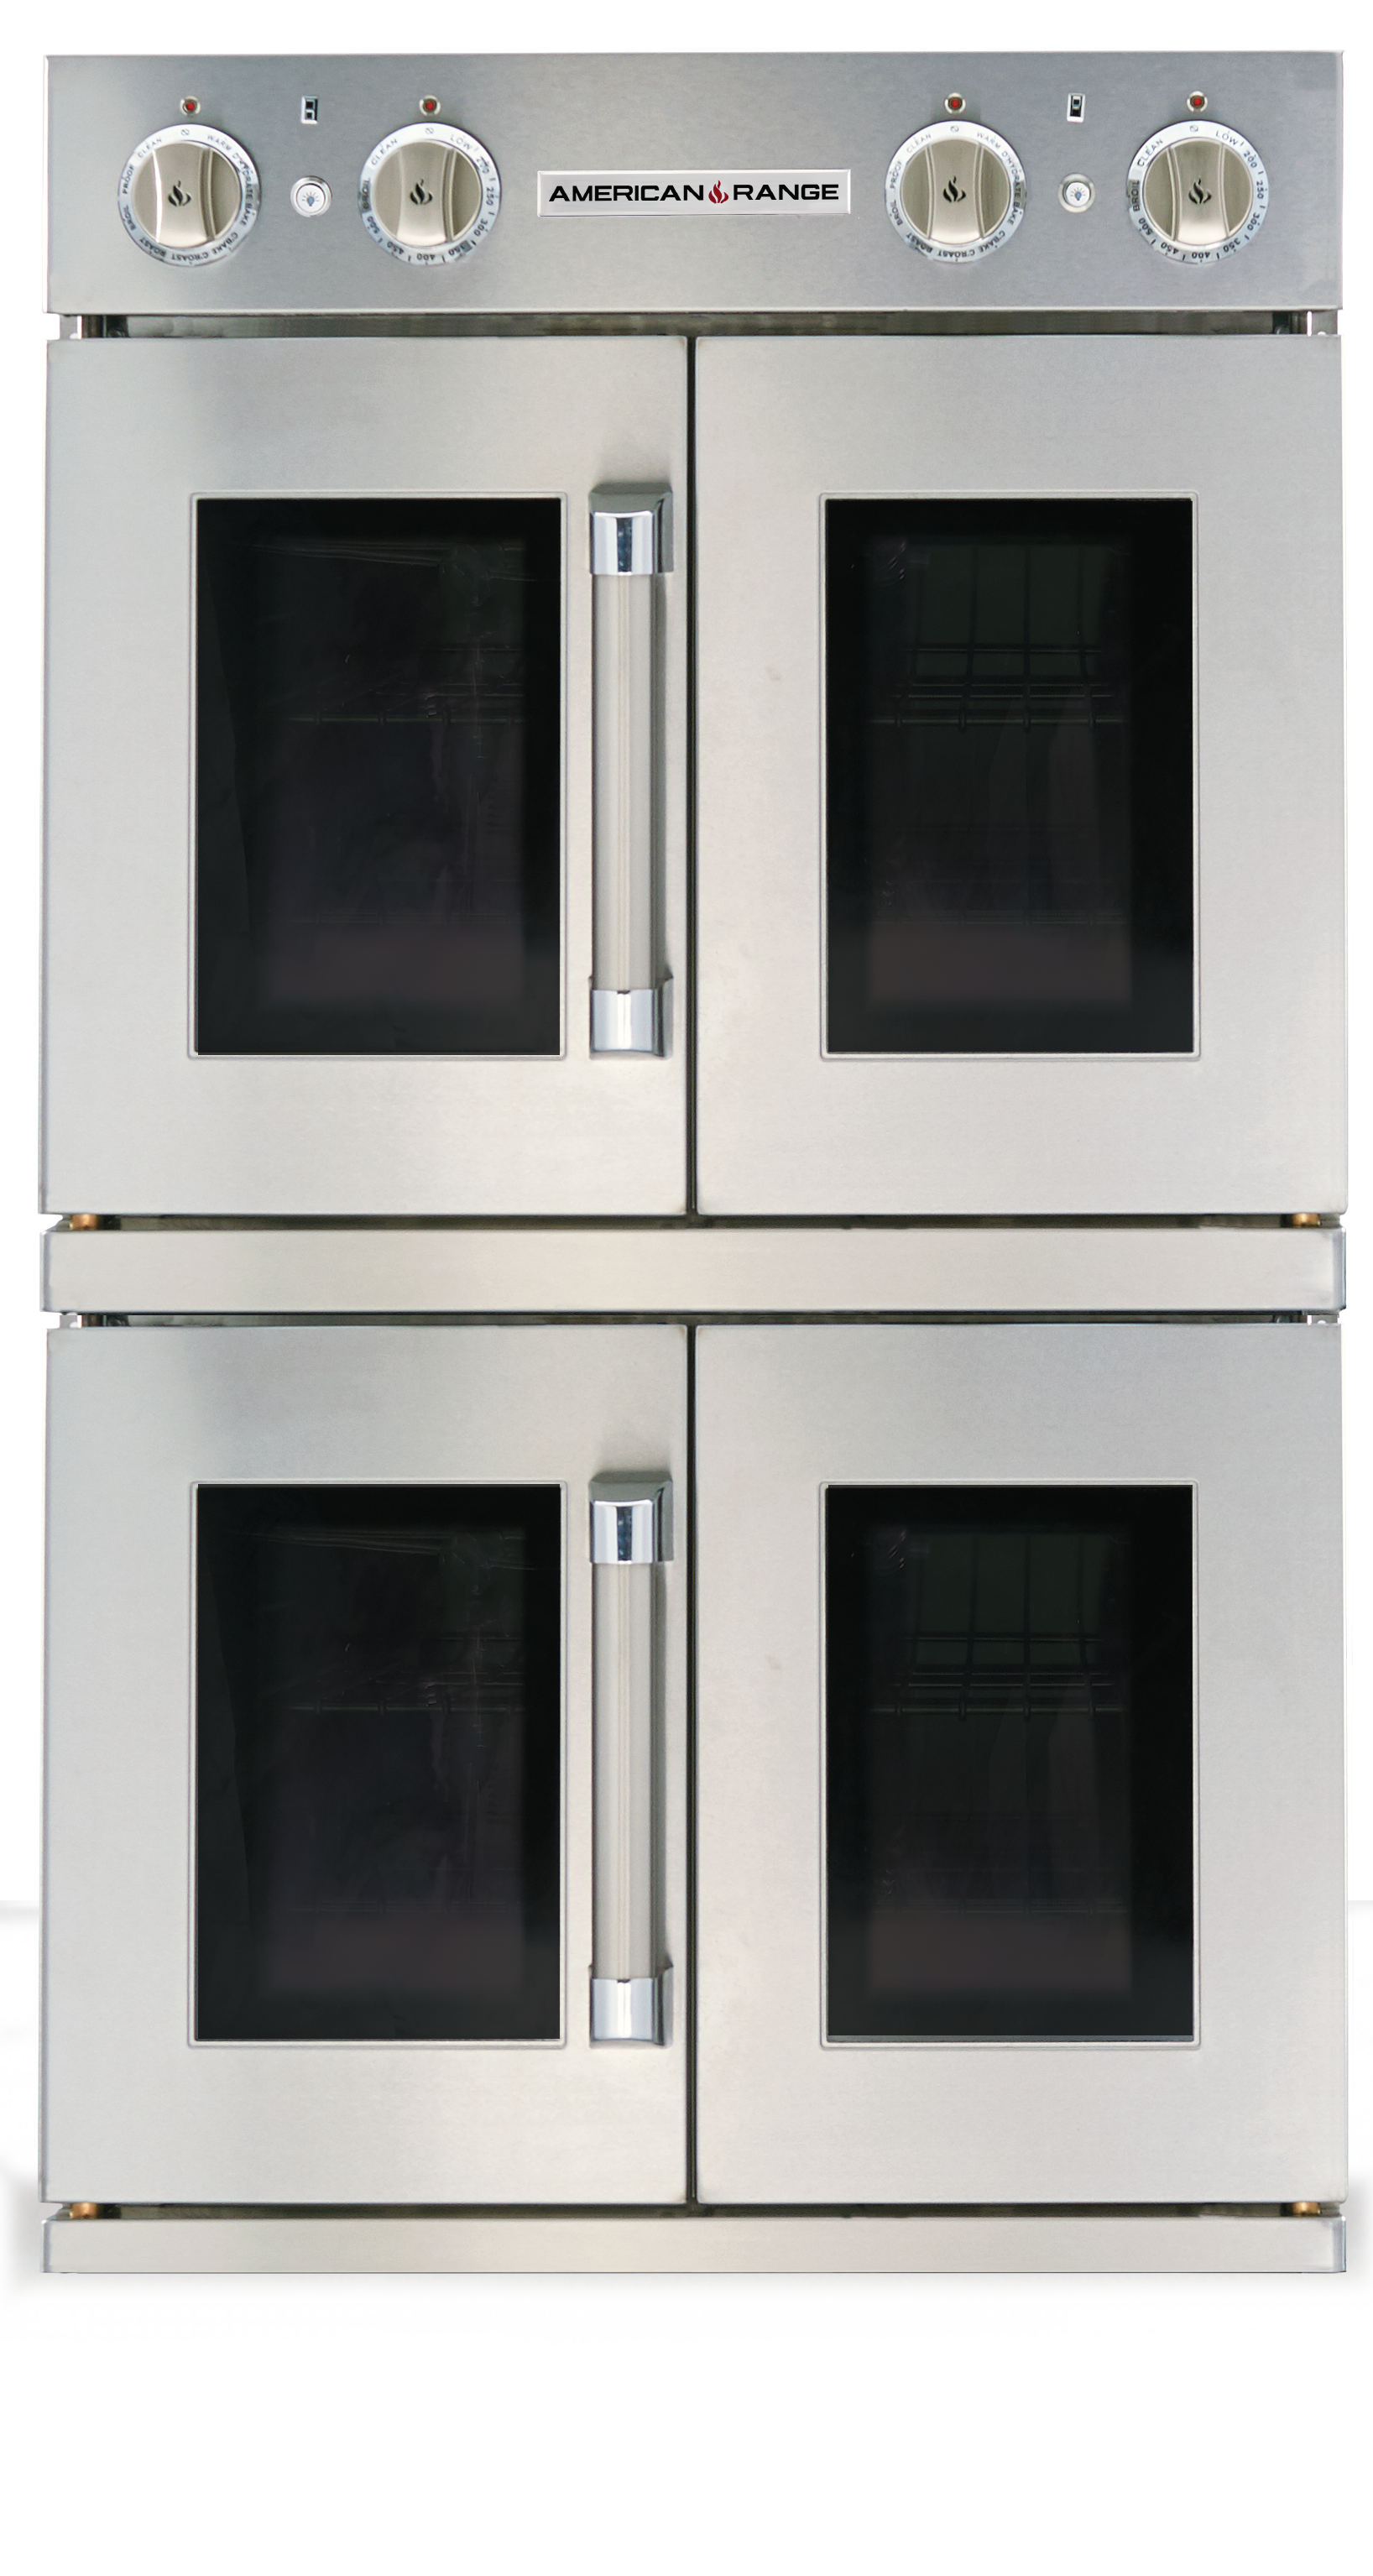 https://americanrangehome.com/wp-content/uploads/2021/01/Double-french-door-revise-silo.png